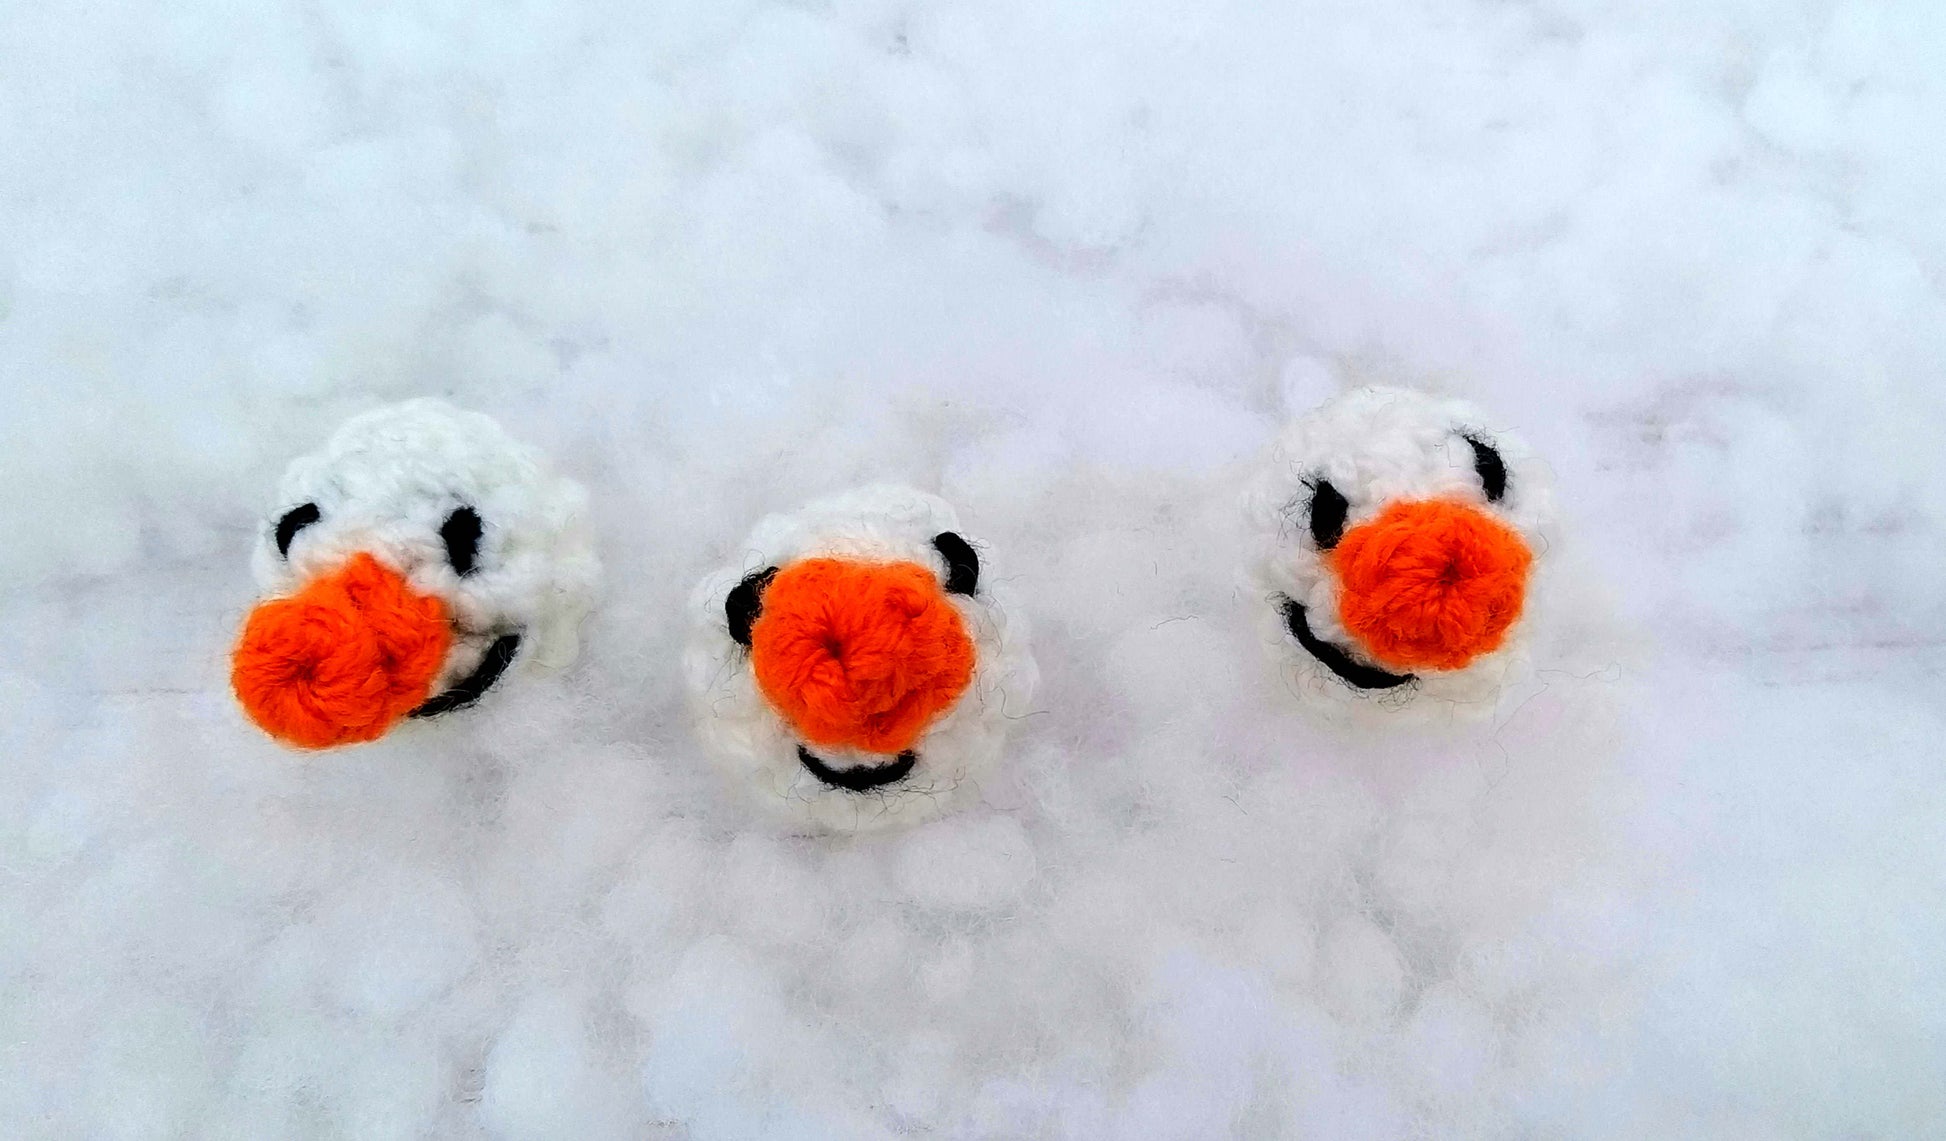 Close up of silly snowman snowballs